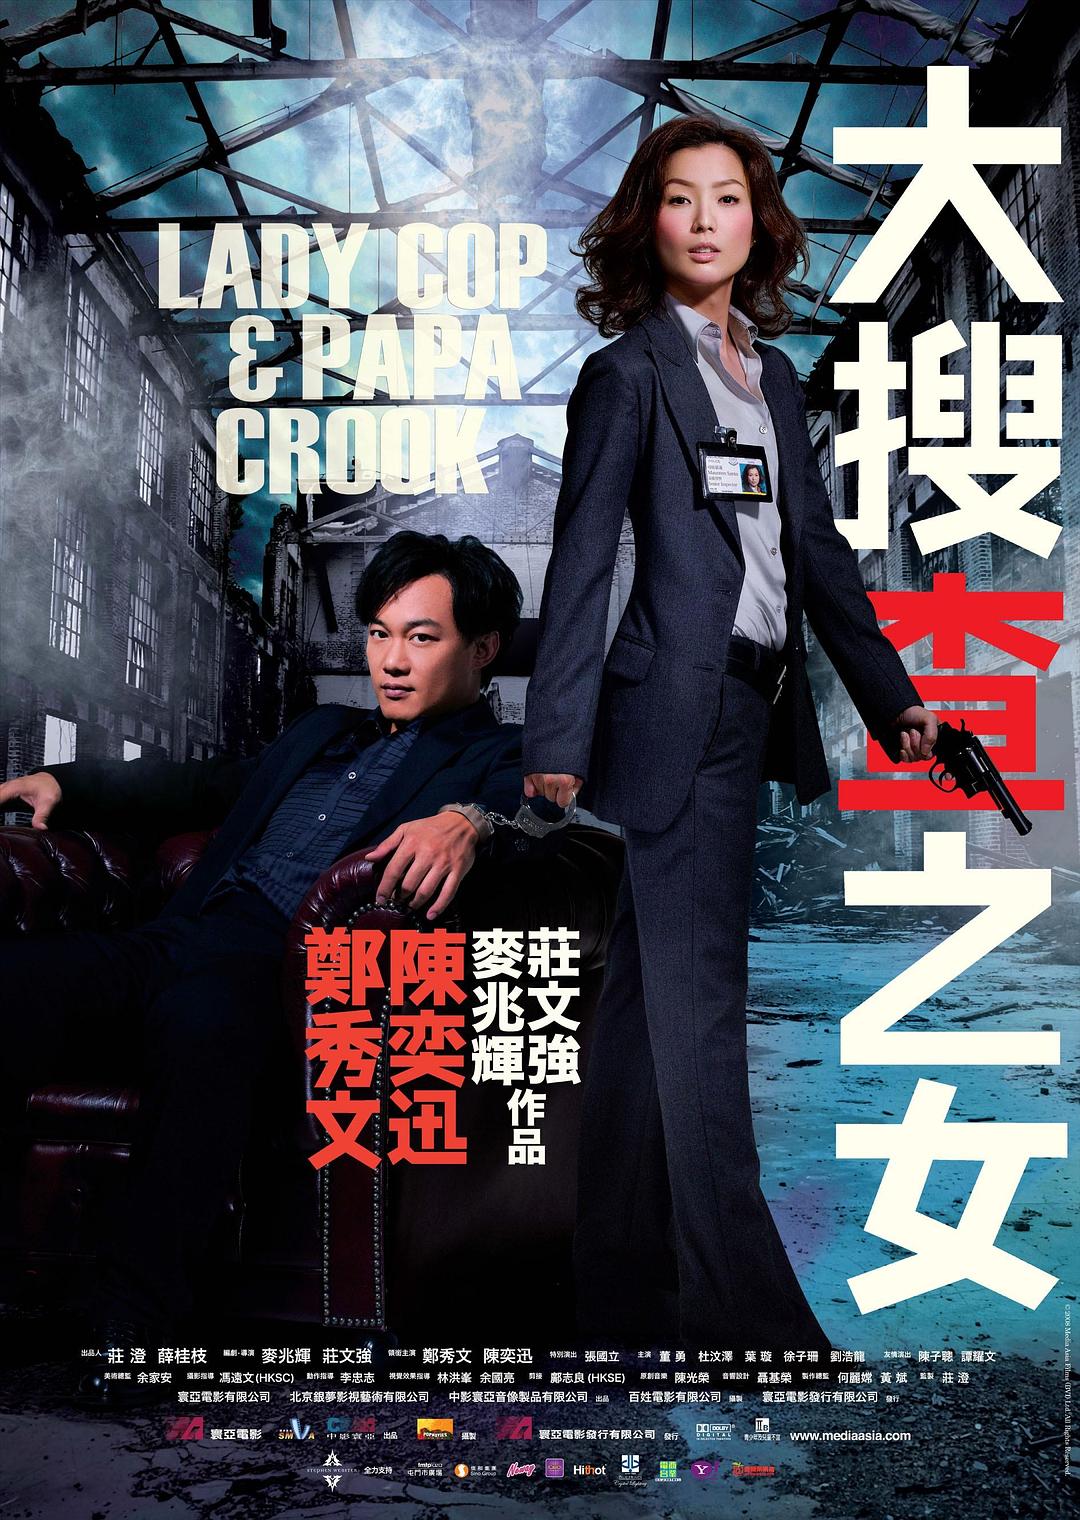 Ѳ֮Ů Lady.Cop.and.Papa.Crook.2008.MANDARiN.DUBBED.THEATRiCAL.720p.BluRay.x264-R-1.png